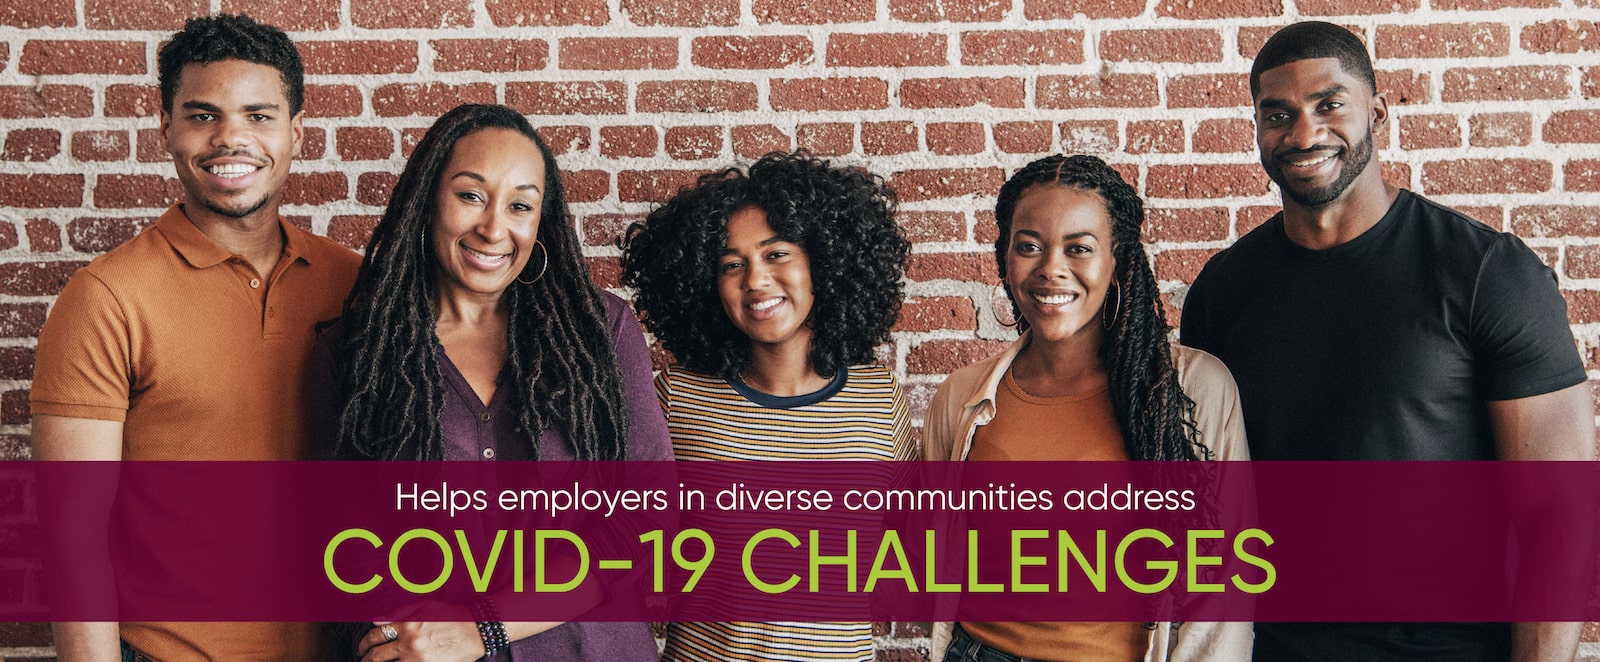 Helps employers in diverse communities address COVID challenges